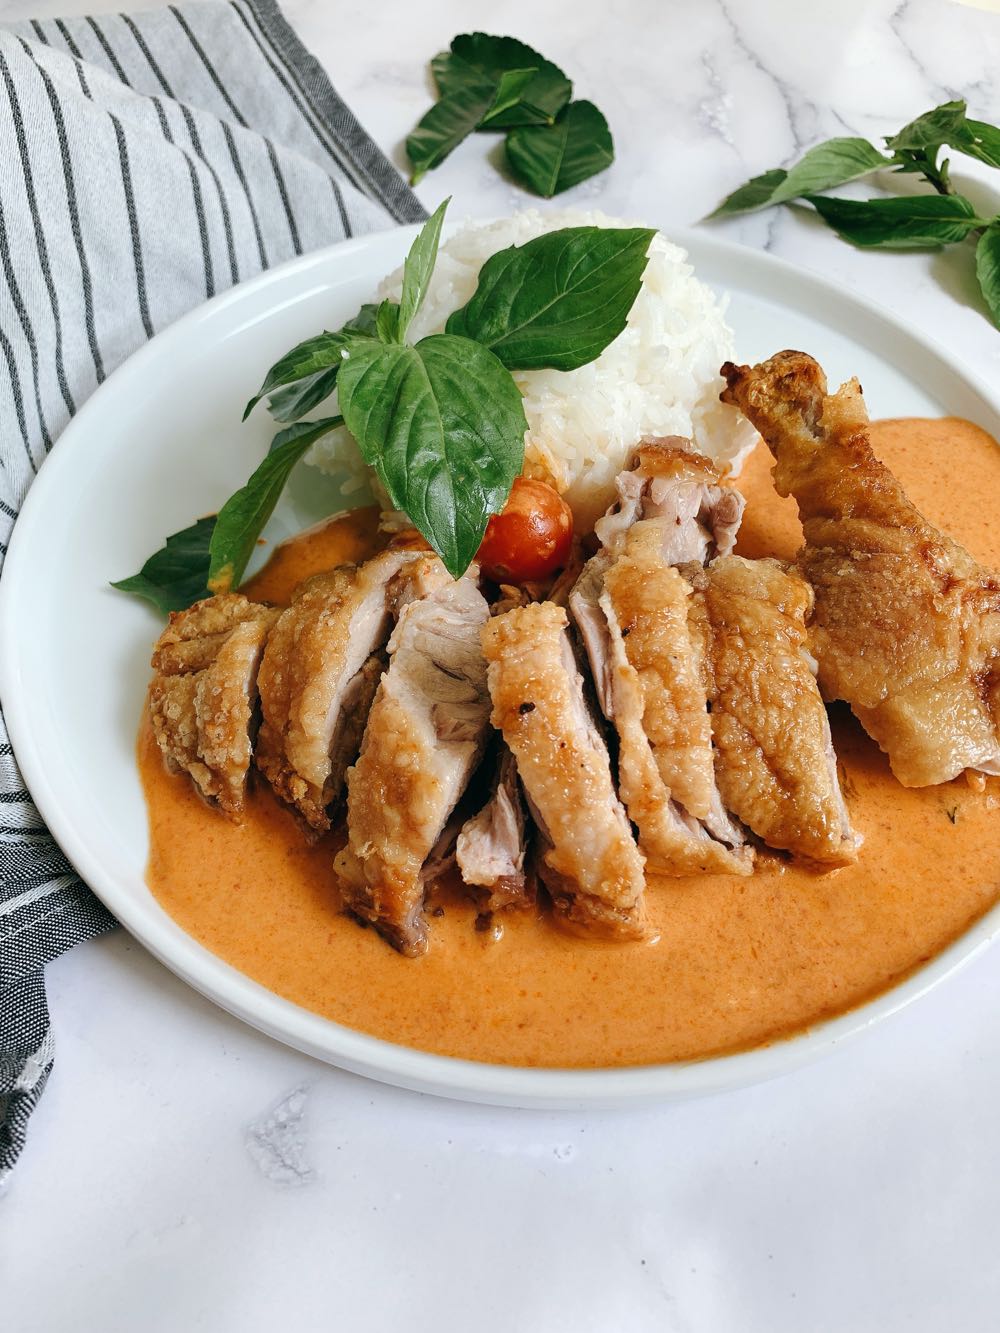 Chu Chee Duck (Red Curry Duck)